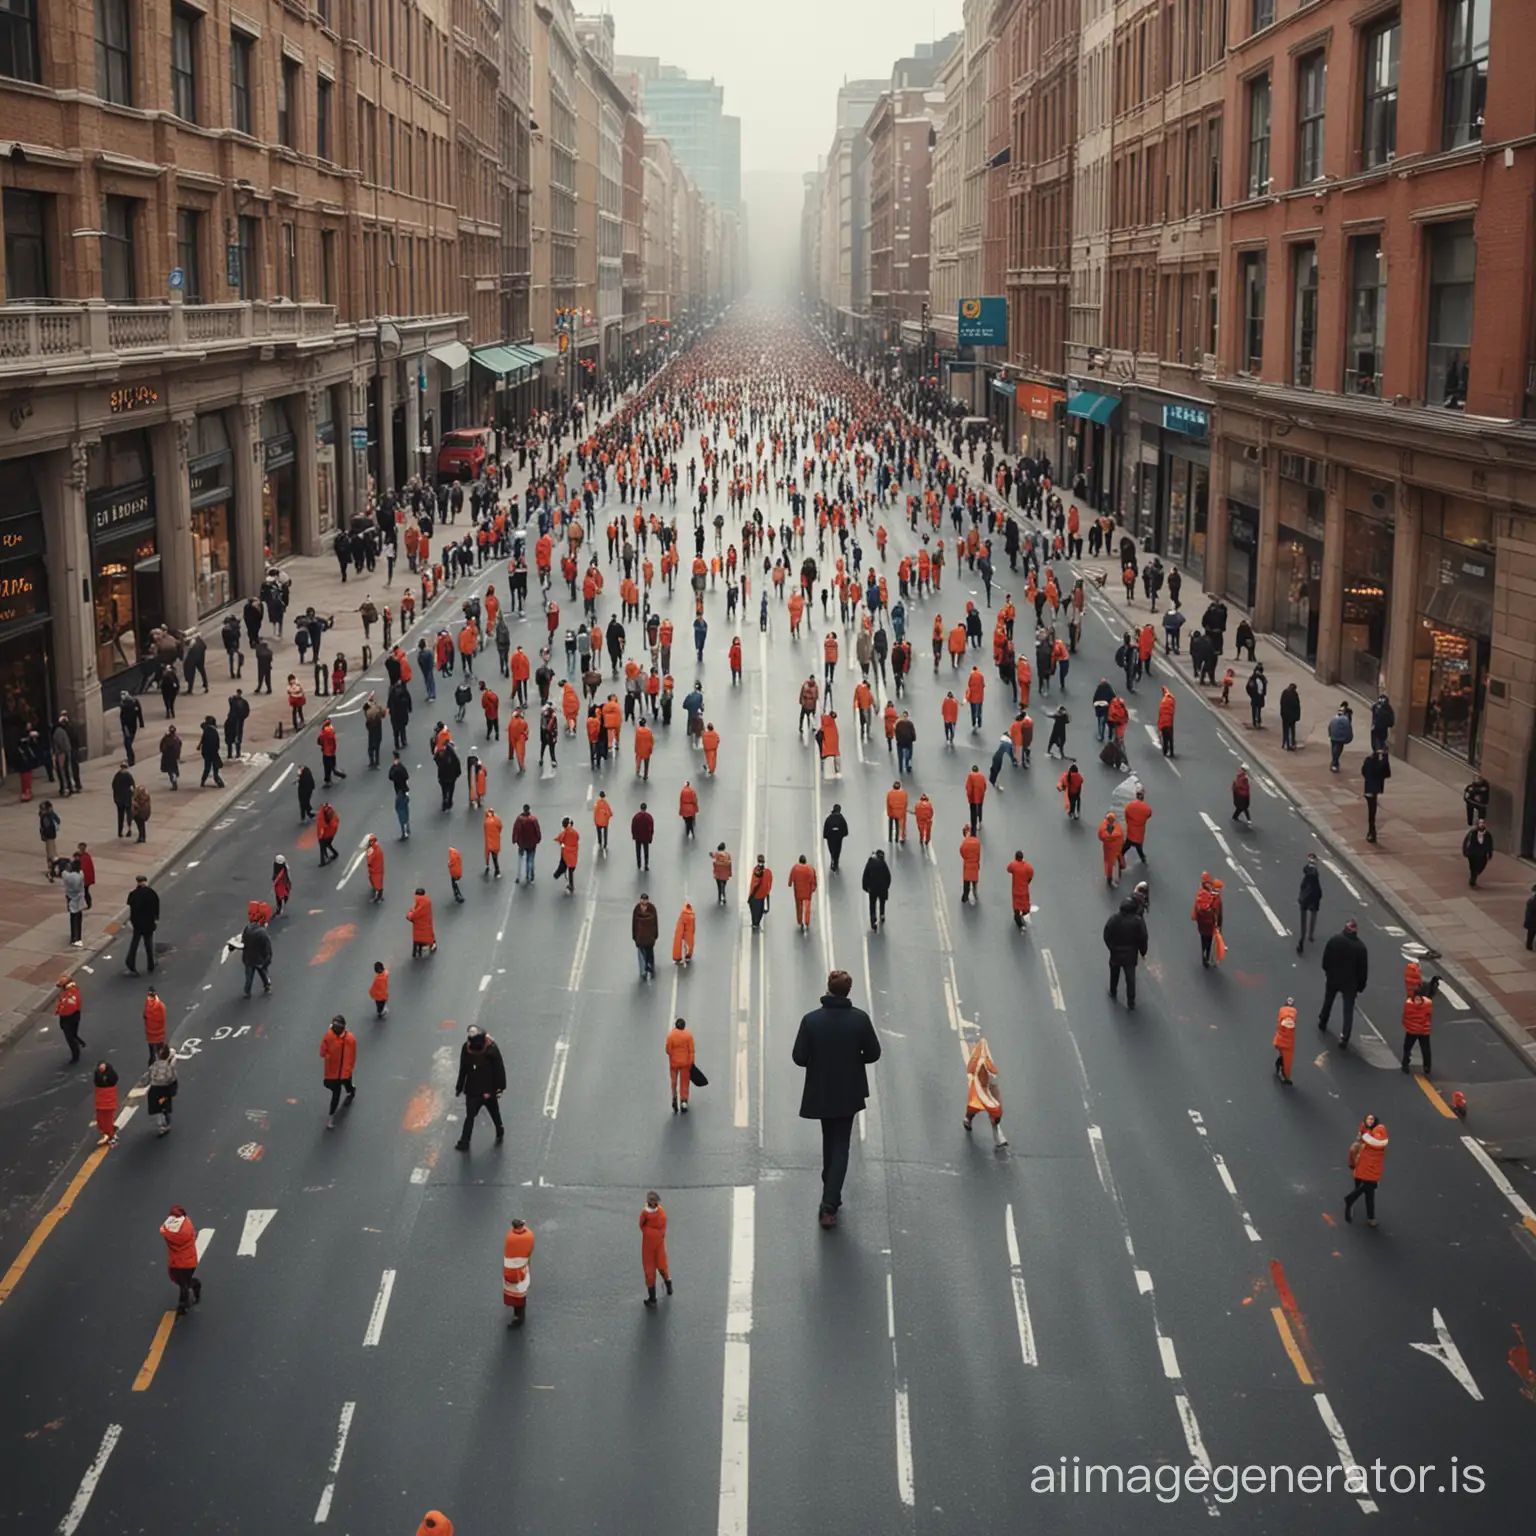 A man walks along the noisy street of the city, surrounded by many pedestrians and cars in the style of Elizabeth Gadd.